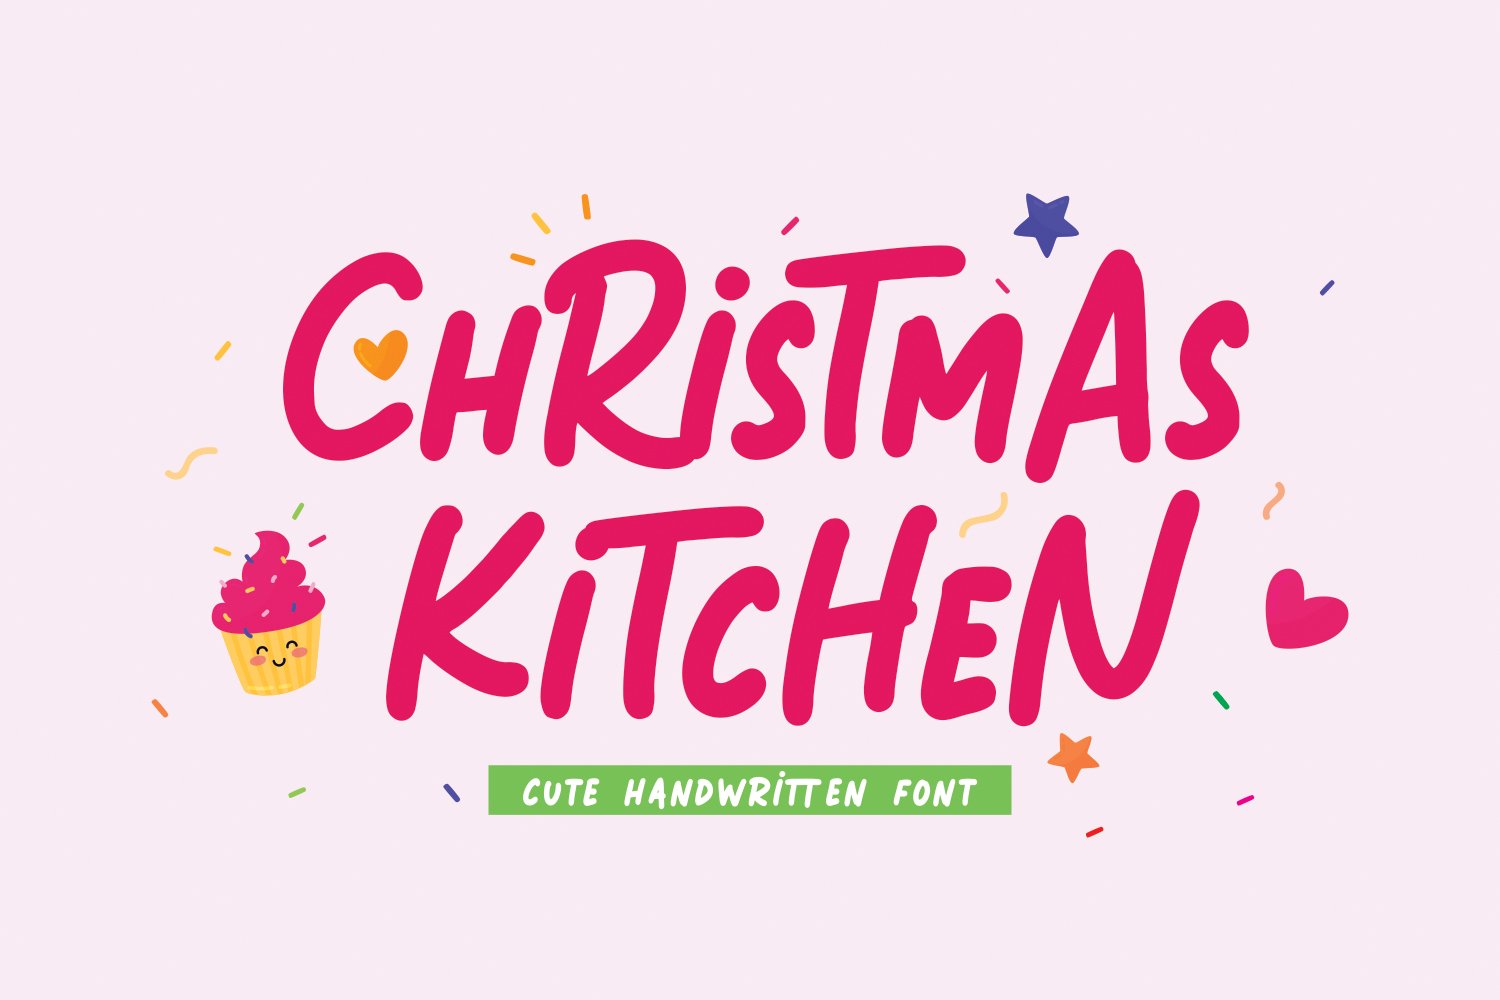 Christmas Kitchen cover image.